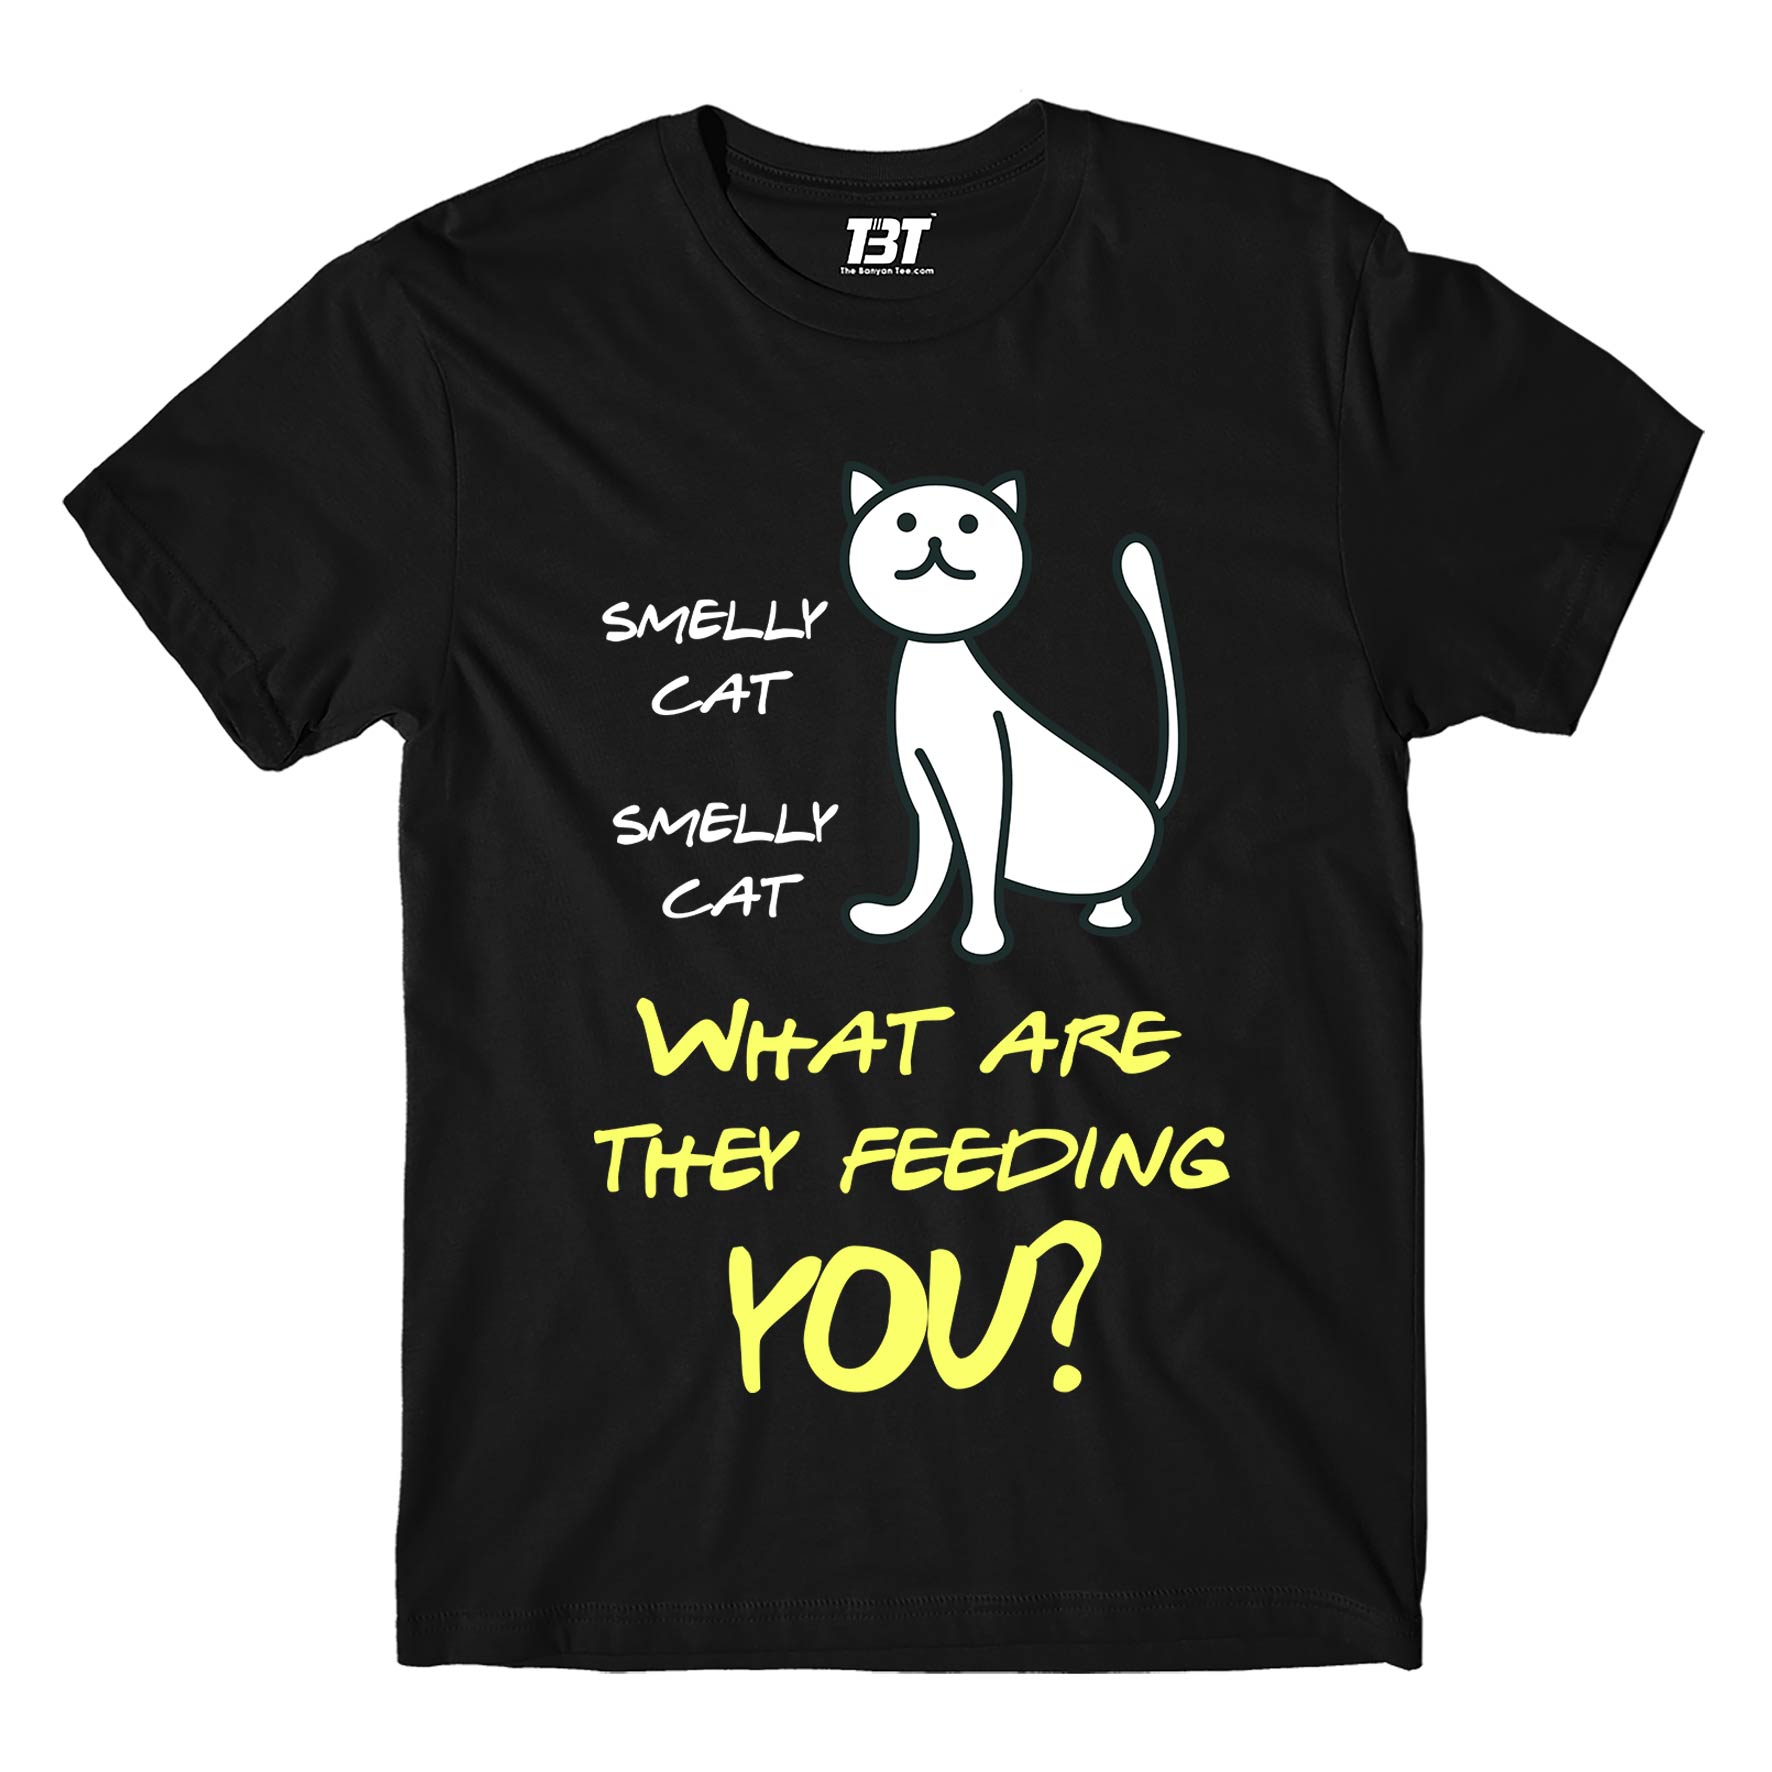 Friends T-shirt - Smelly Cat by The Banyan Tee TBT